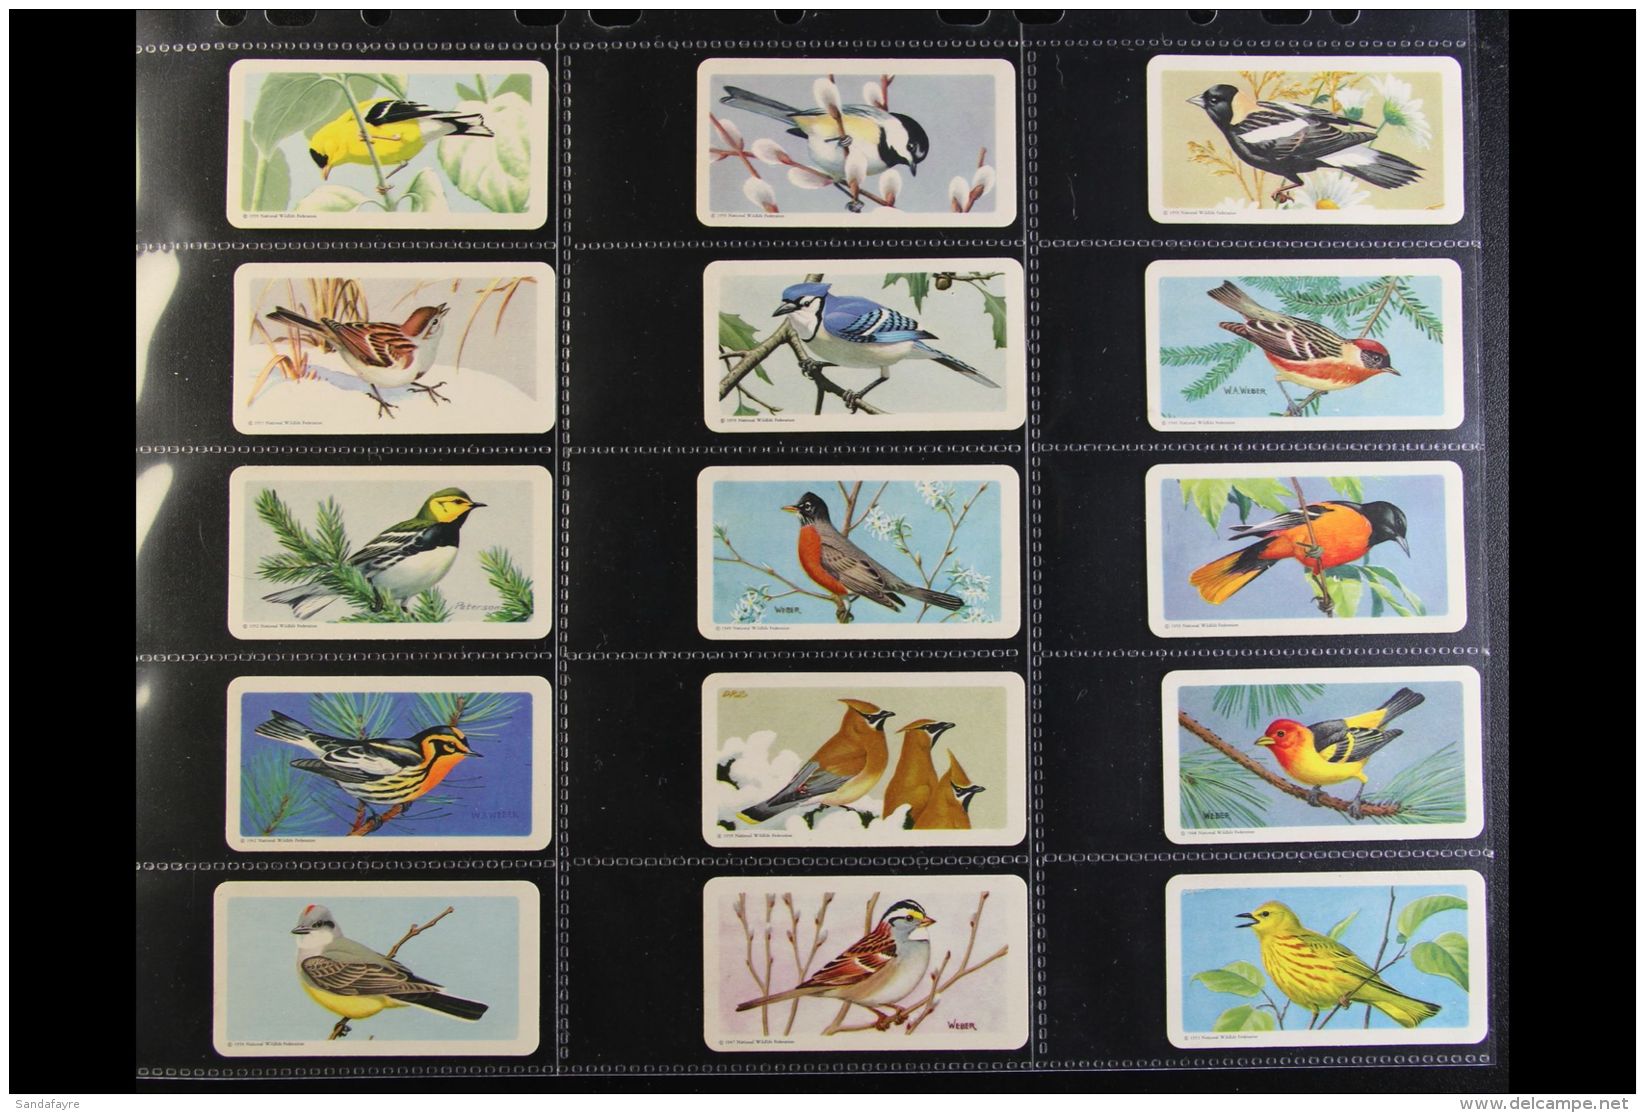 BROOKE BOND CANADIAN ISSUES 1959-1973 All Different Complete Sets, Inc 1959 Songbirds, 1961 Wild Flowers, 1962... - Unclassified